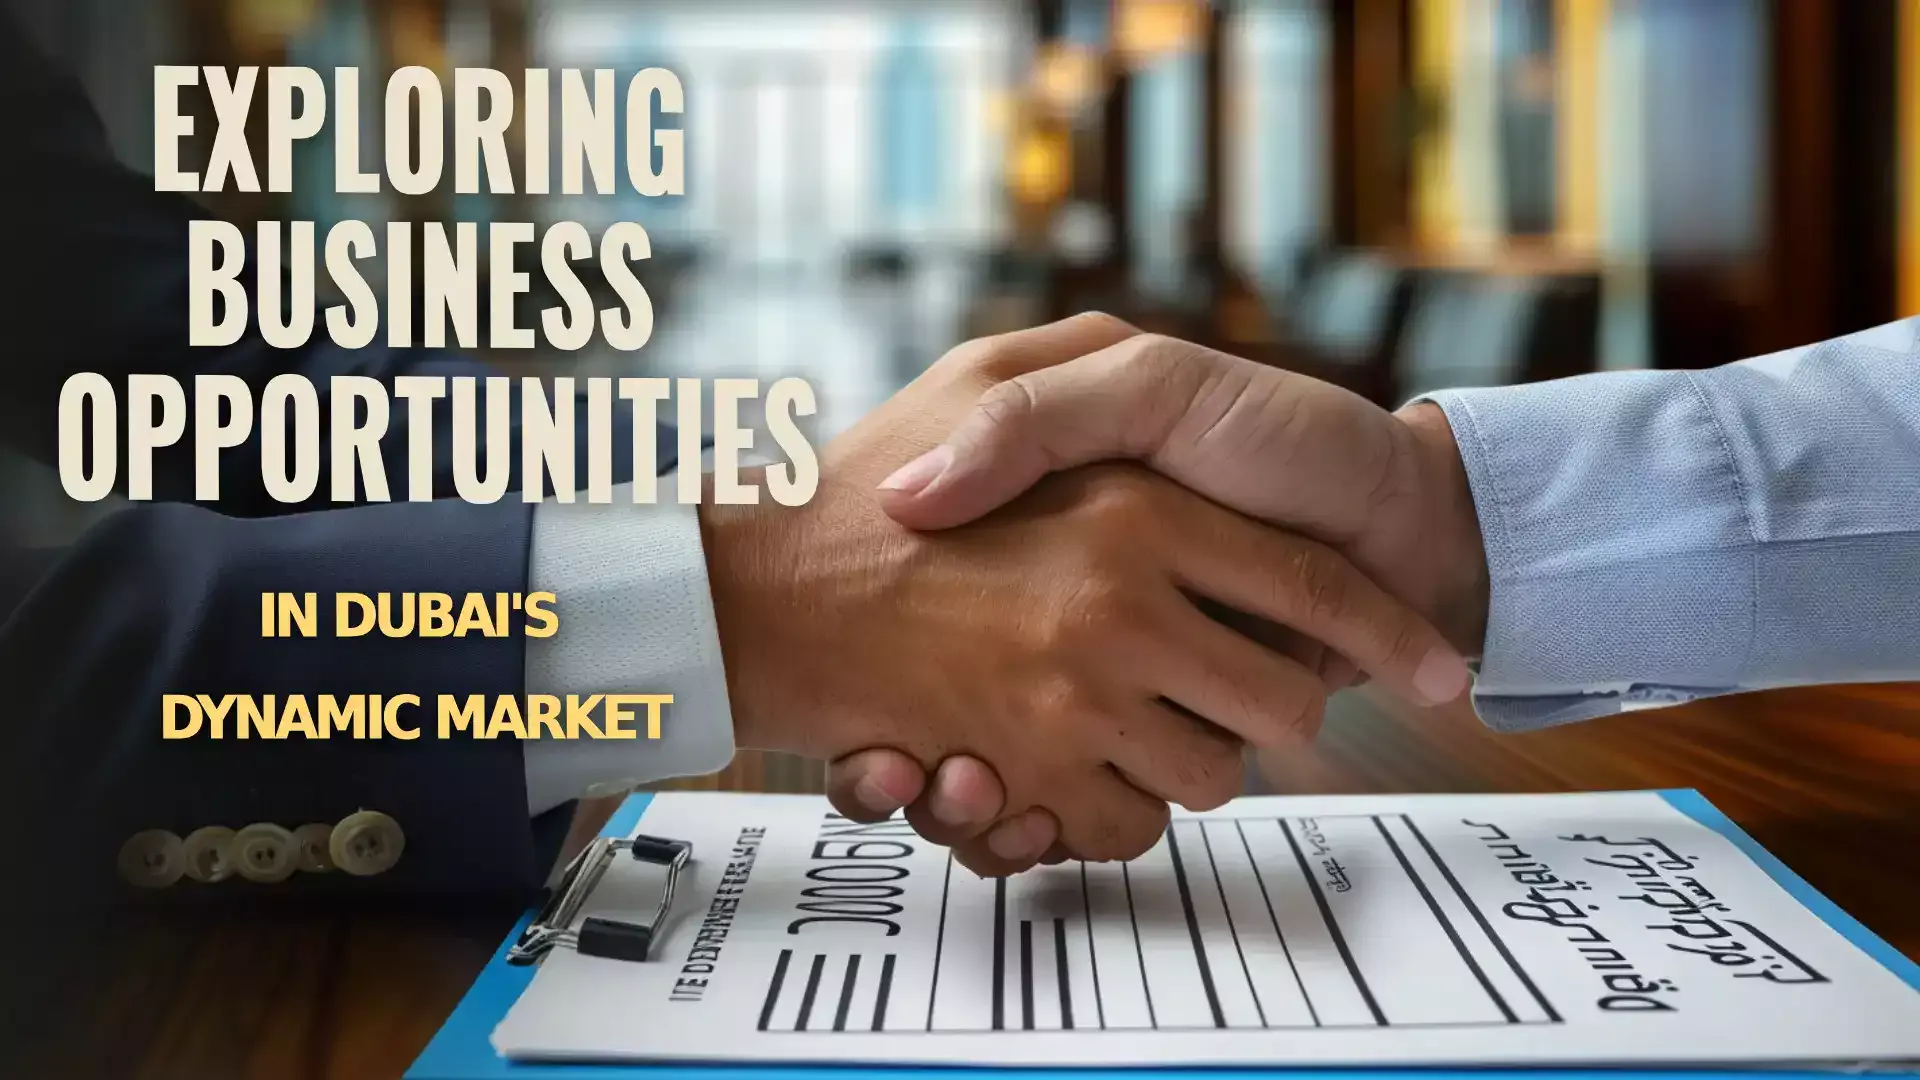 Image depicting various business opportunities available in Dubai